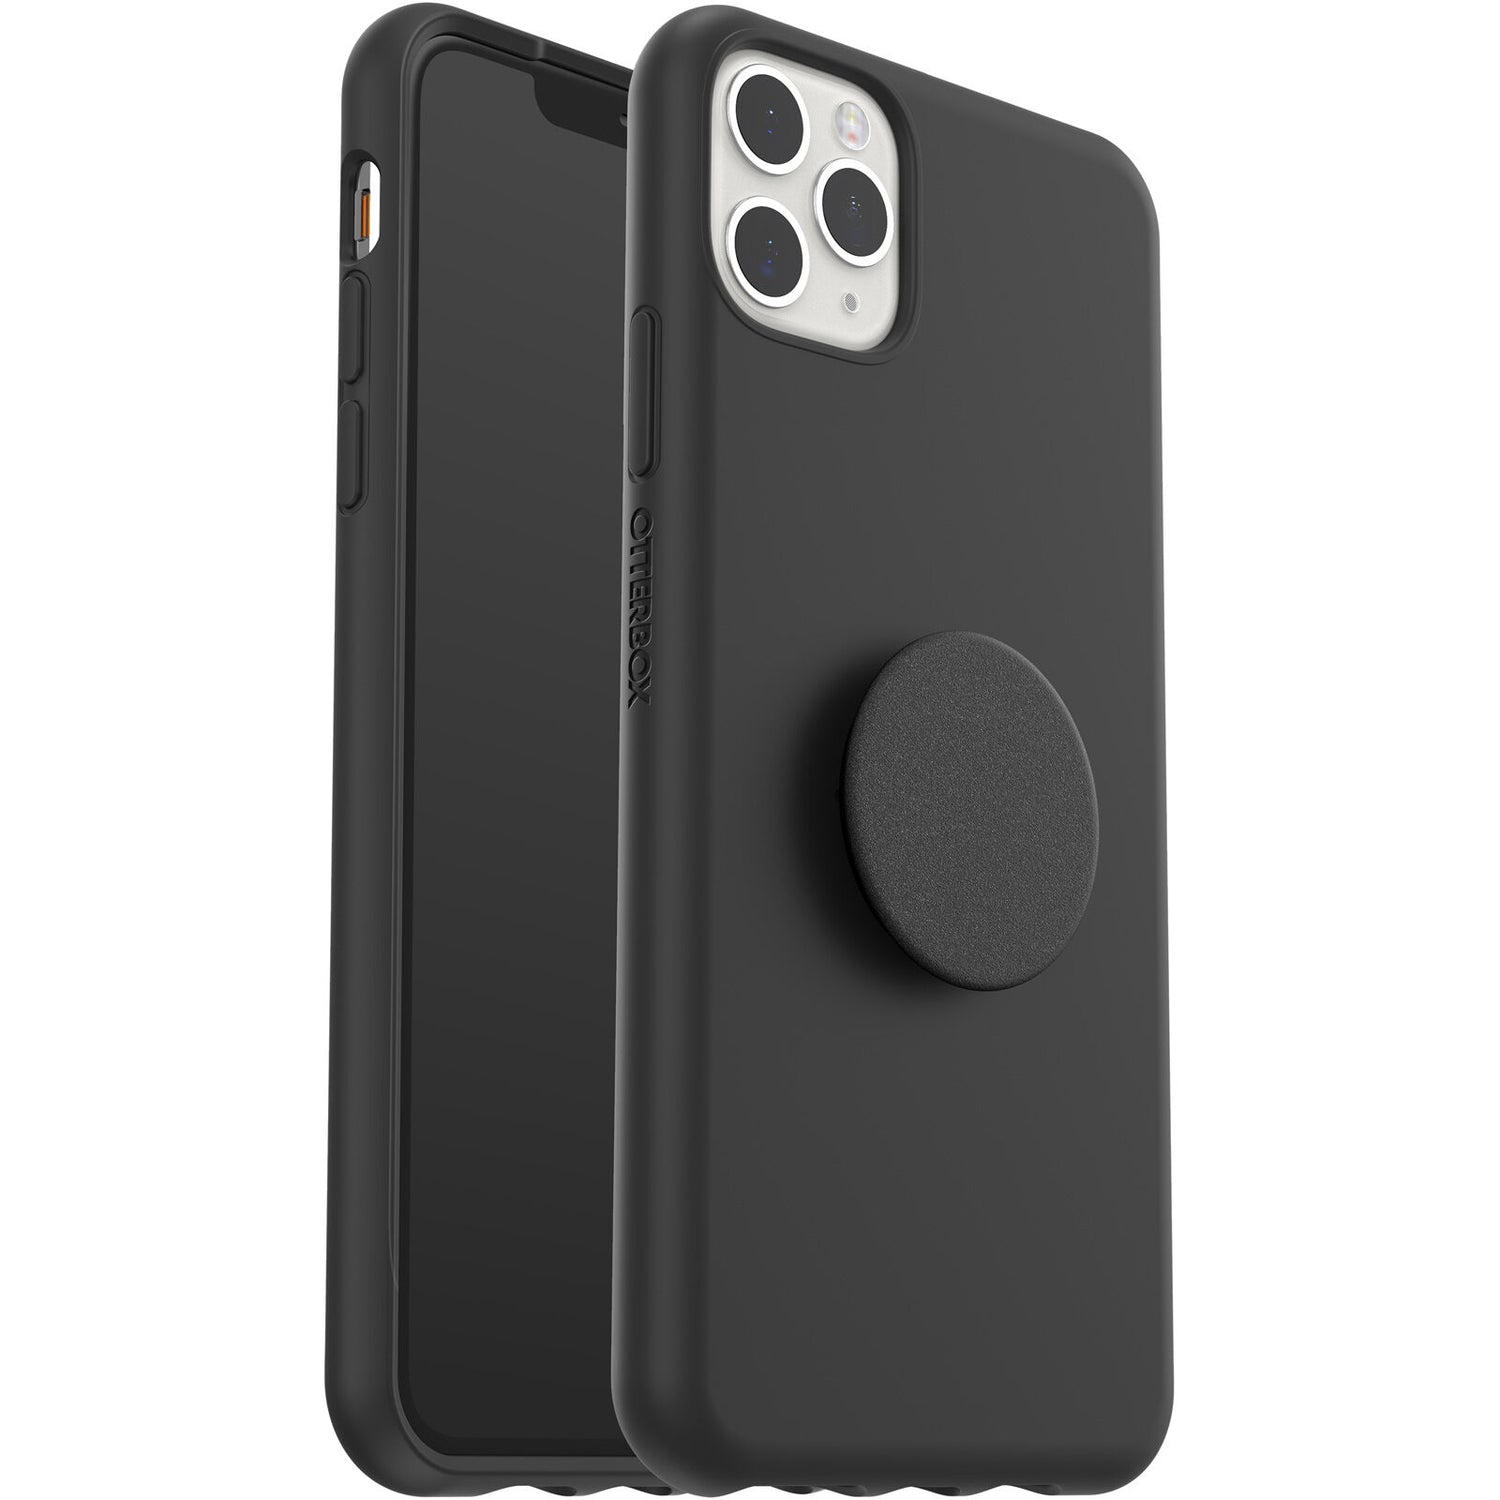 OtterBox Otter+Pop FIGURA SERIES Case for Apple iPhone 11 Pro Max - Black (Certified Refurbished)